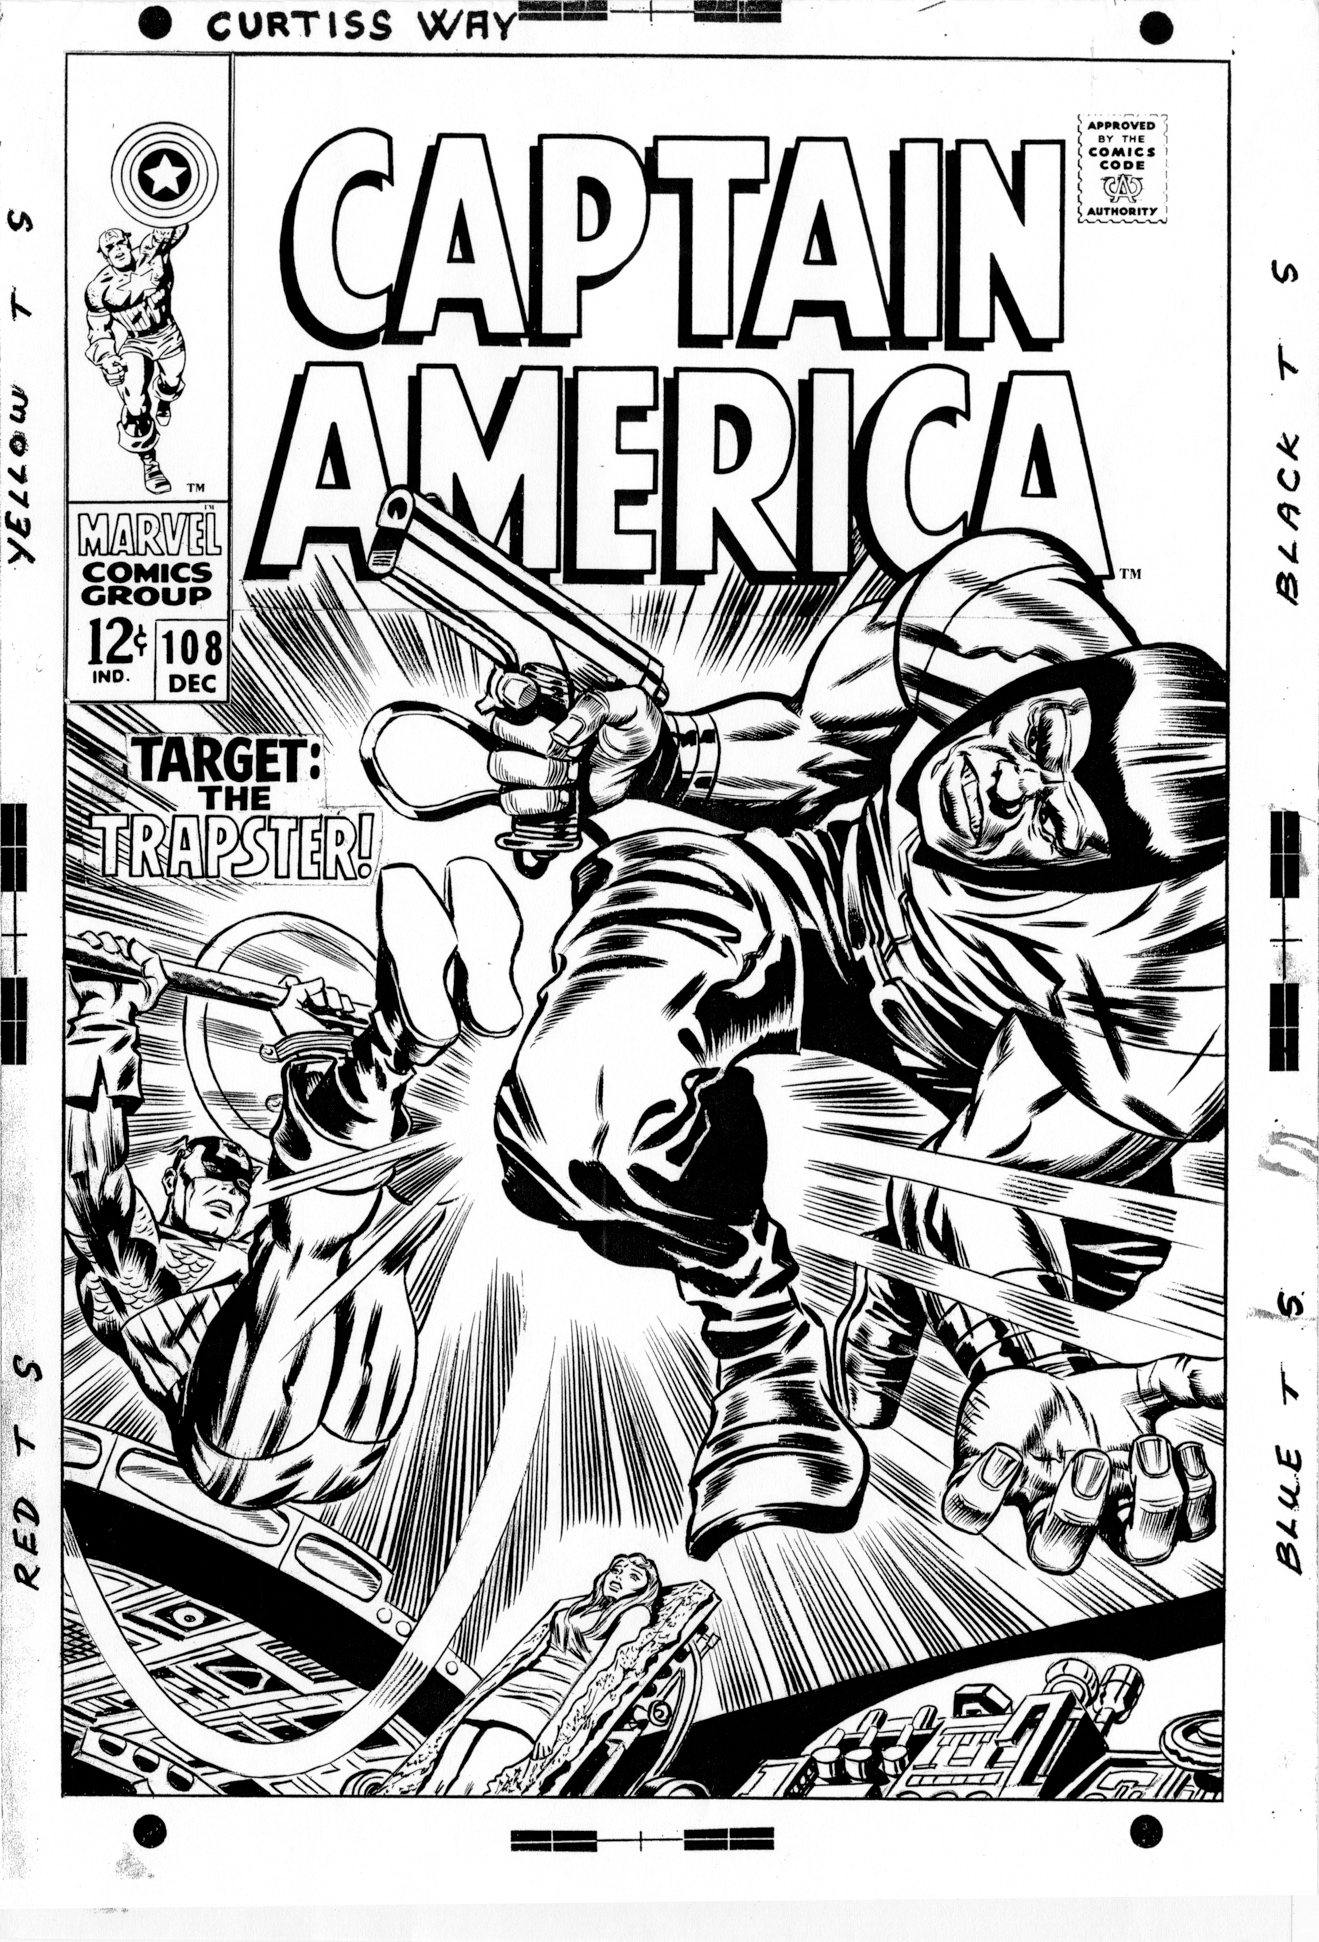 Line art from an issue of Captain America.